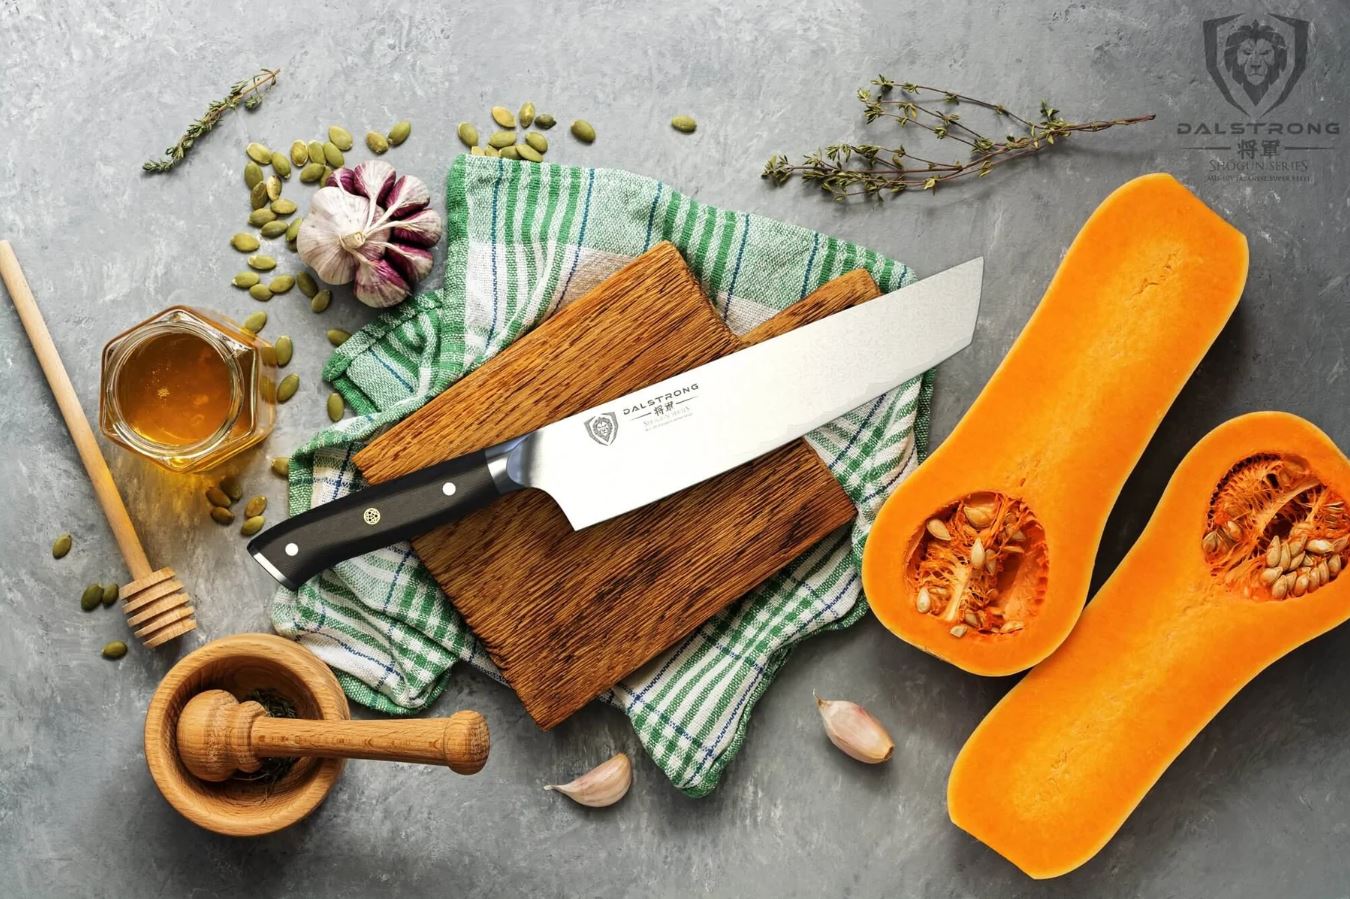 Cleaning & Protecting Blades & Knife Handles for Valuable & Antique Knives  - The Cutting Edge